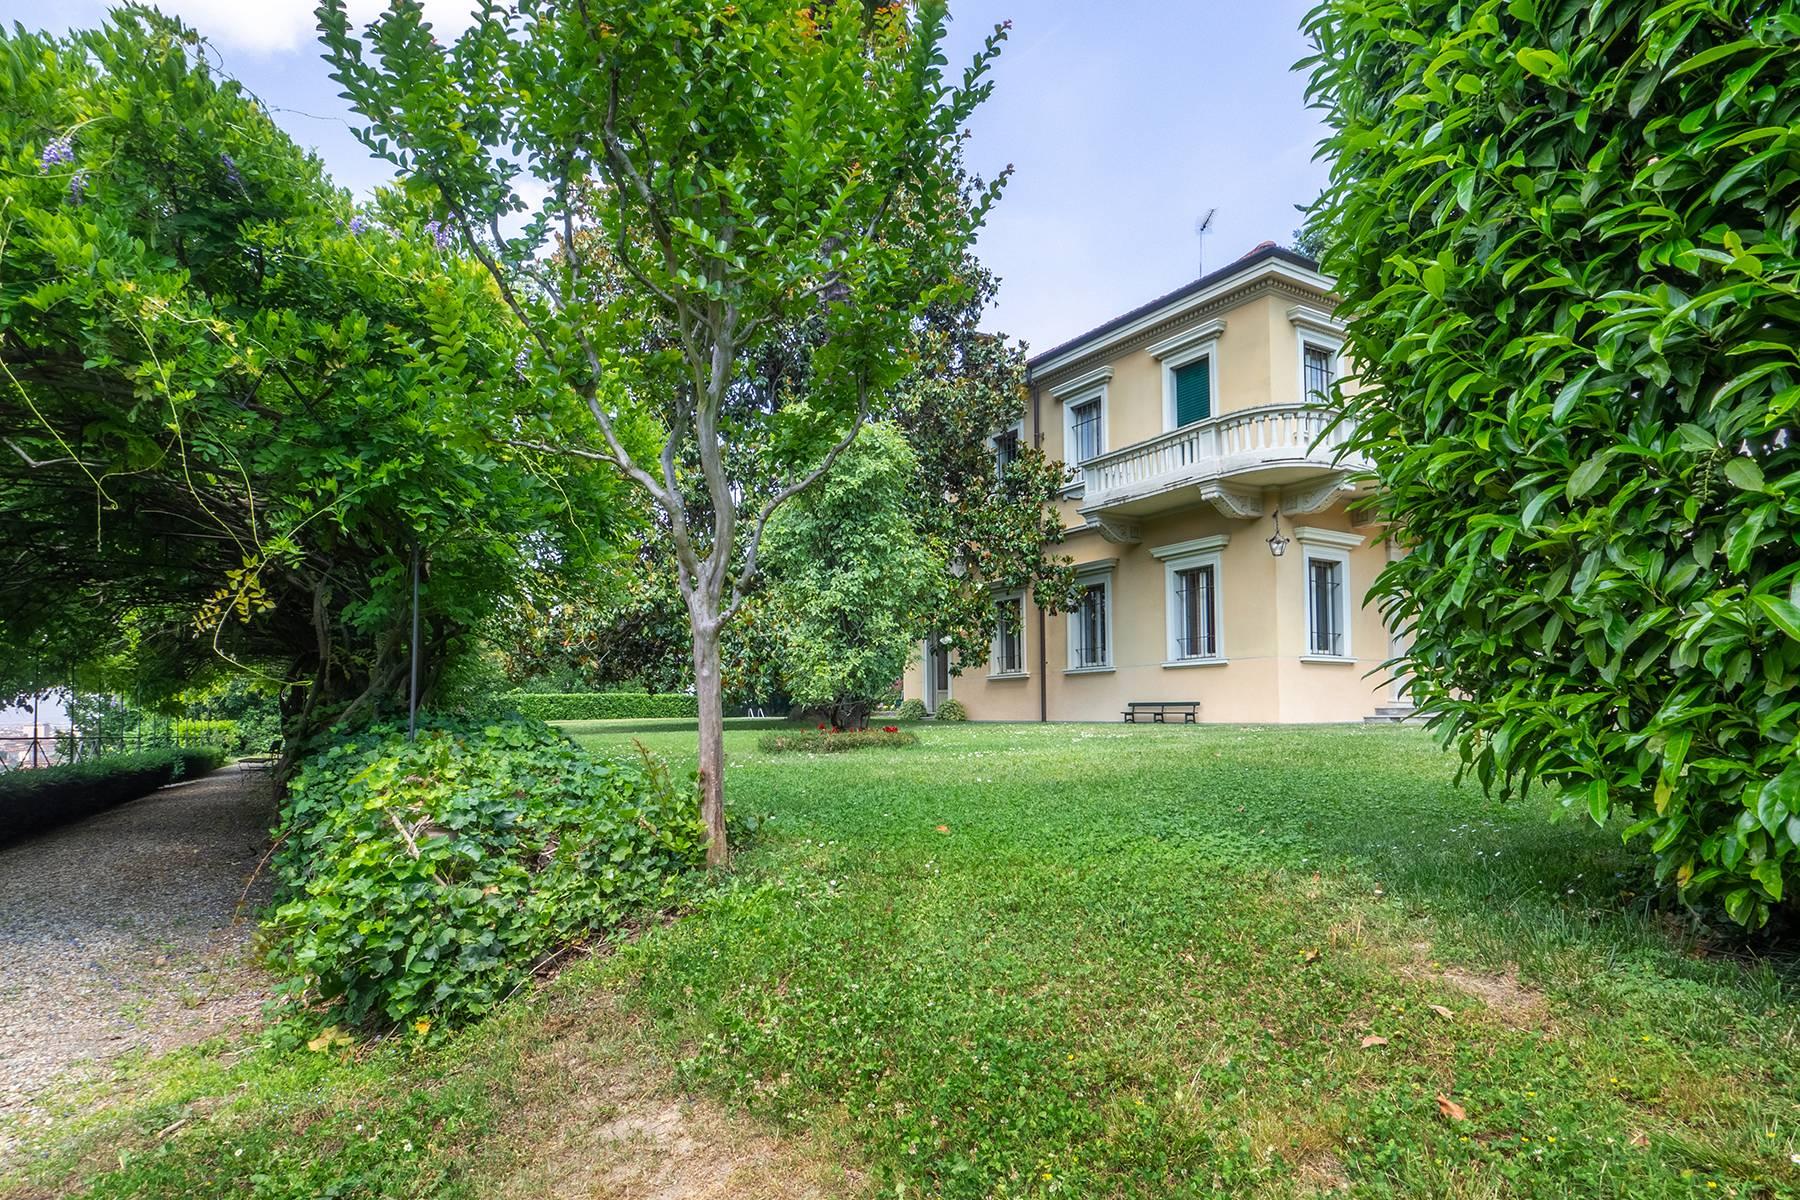 Exquisite villa with swimming pool in the hill of Turin - 22